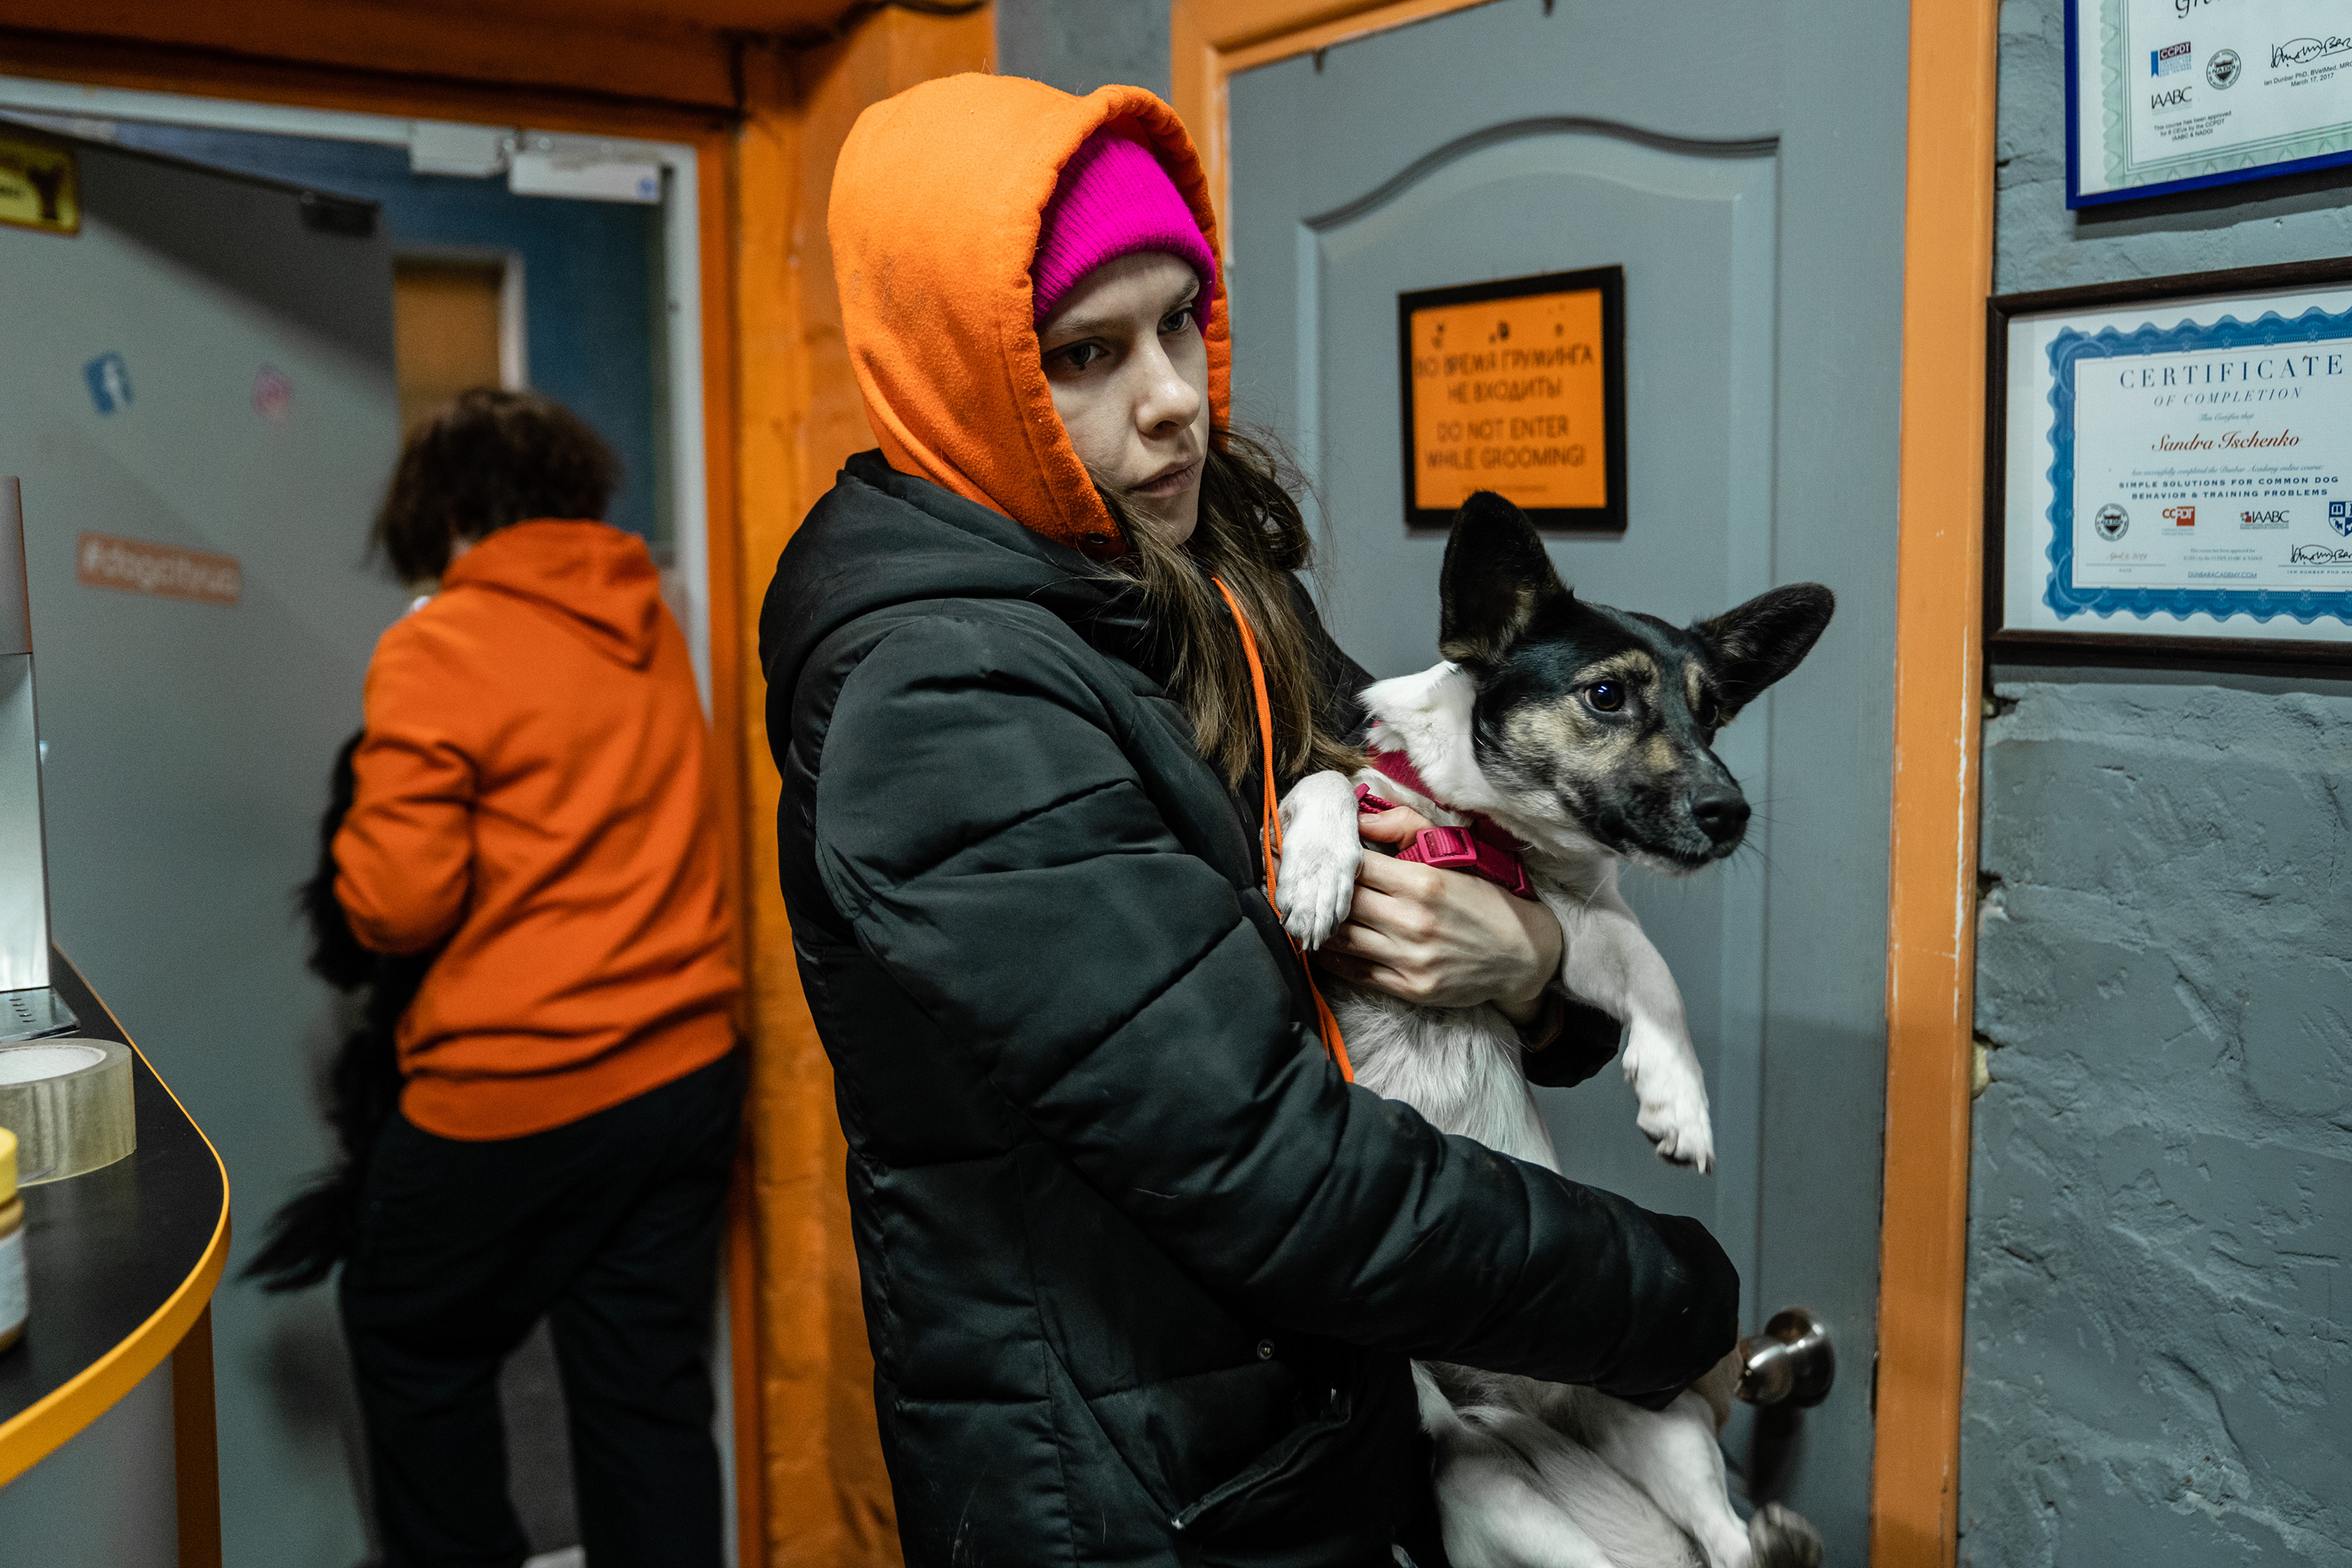 Anastasia, an employee at Dog City, carries a frightened dog into the shelter.